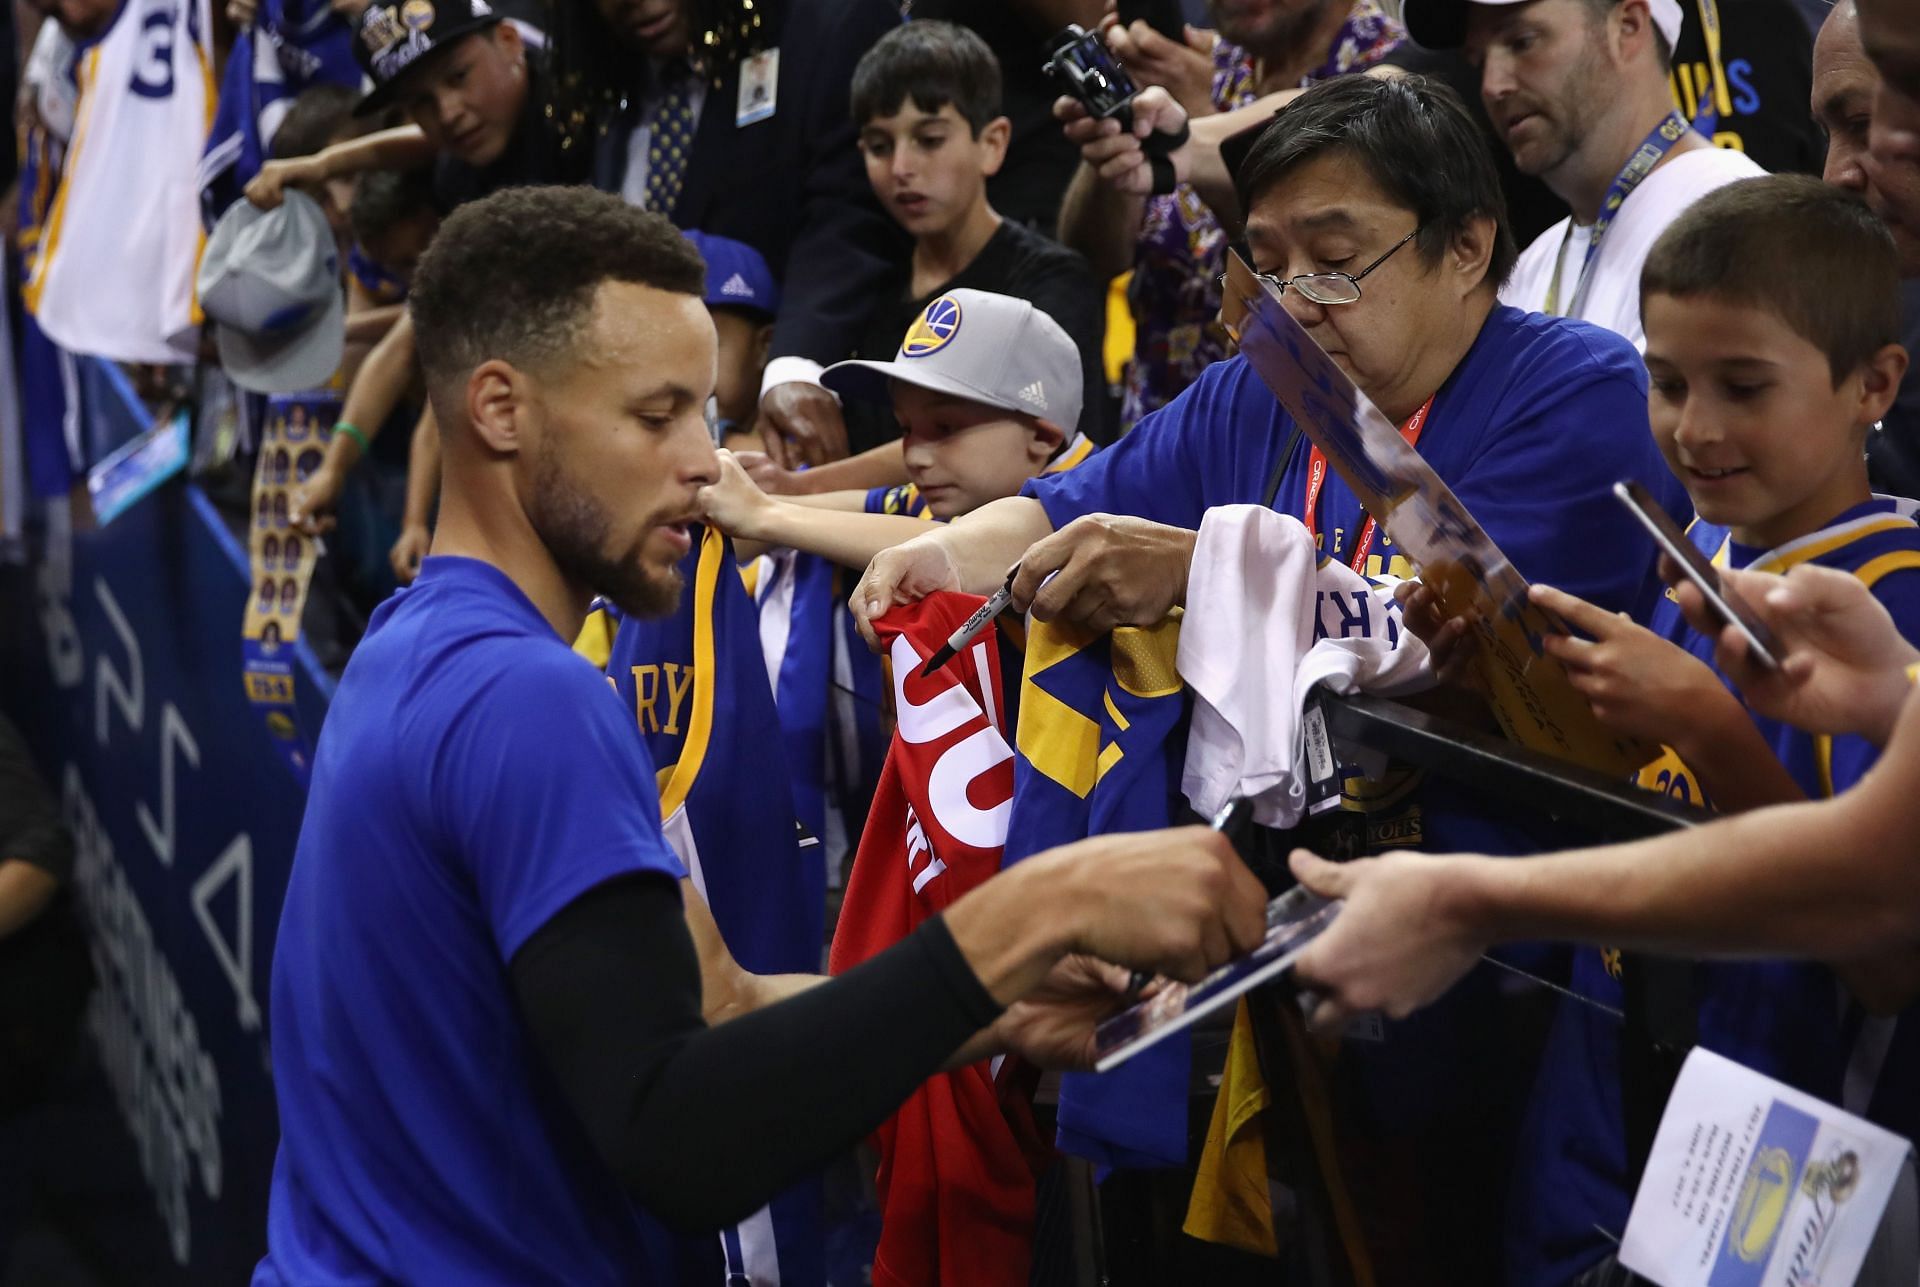 Steph Curry of the Golden State Warriors signs autographs for fans.